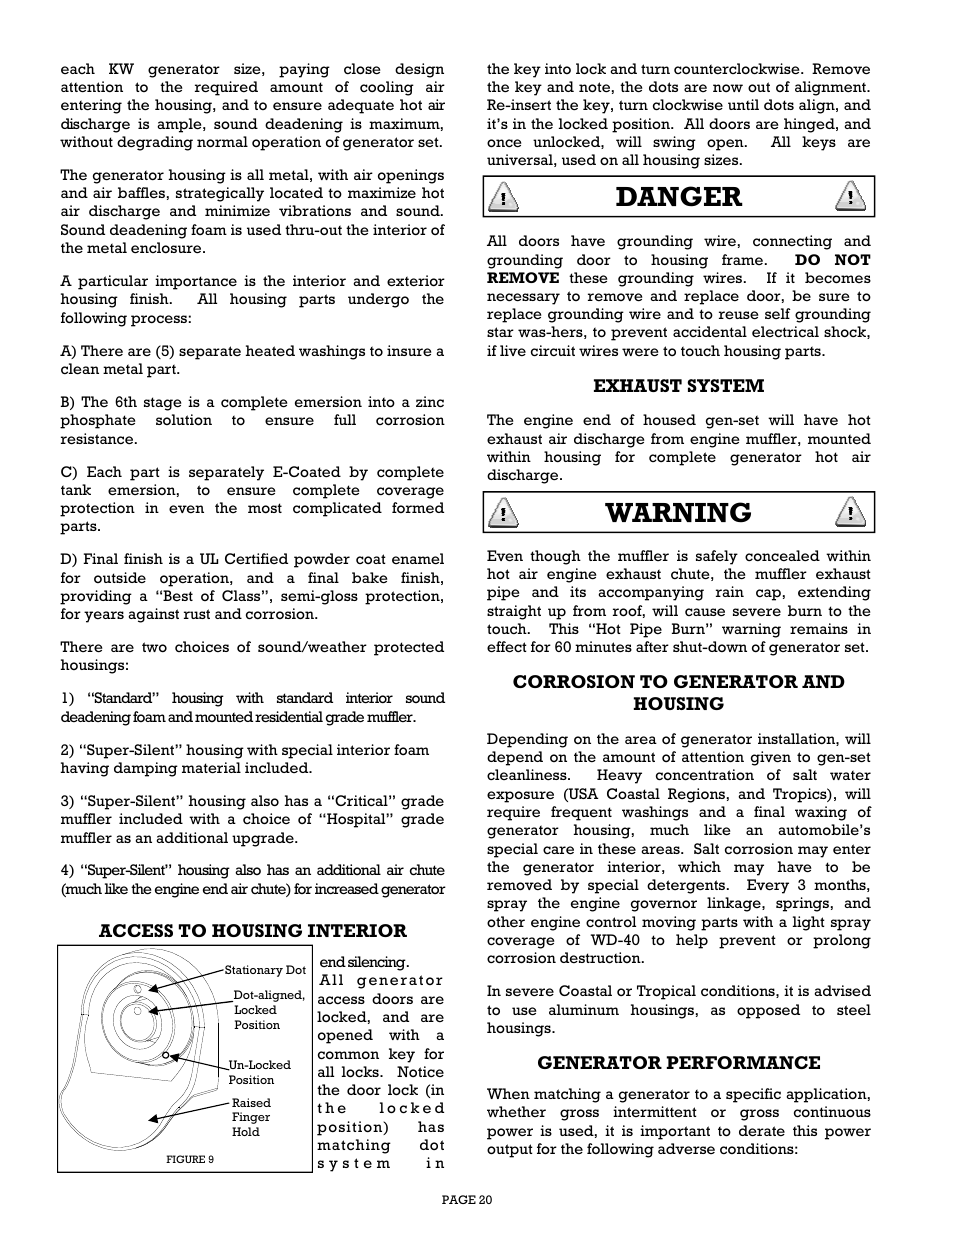 Danger, Warning, Exhaust system | Corrosion to generator and housing, Generator performance, Access to housing interior | Gillette Generators SPMD-2500 THRU SPMD-4000 User Manual | Page 20 / 27